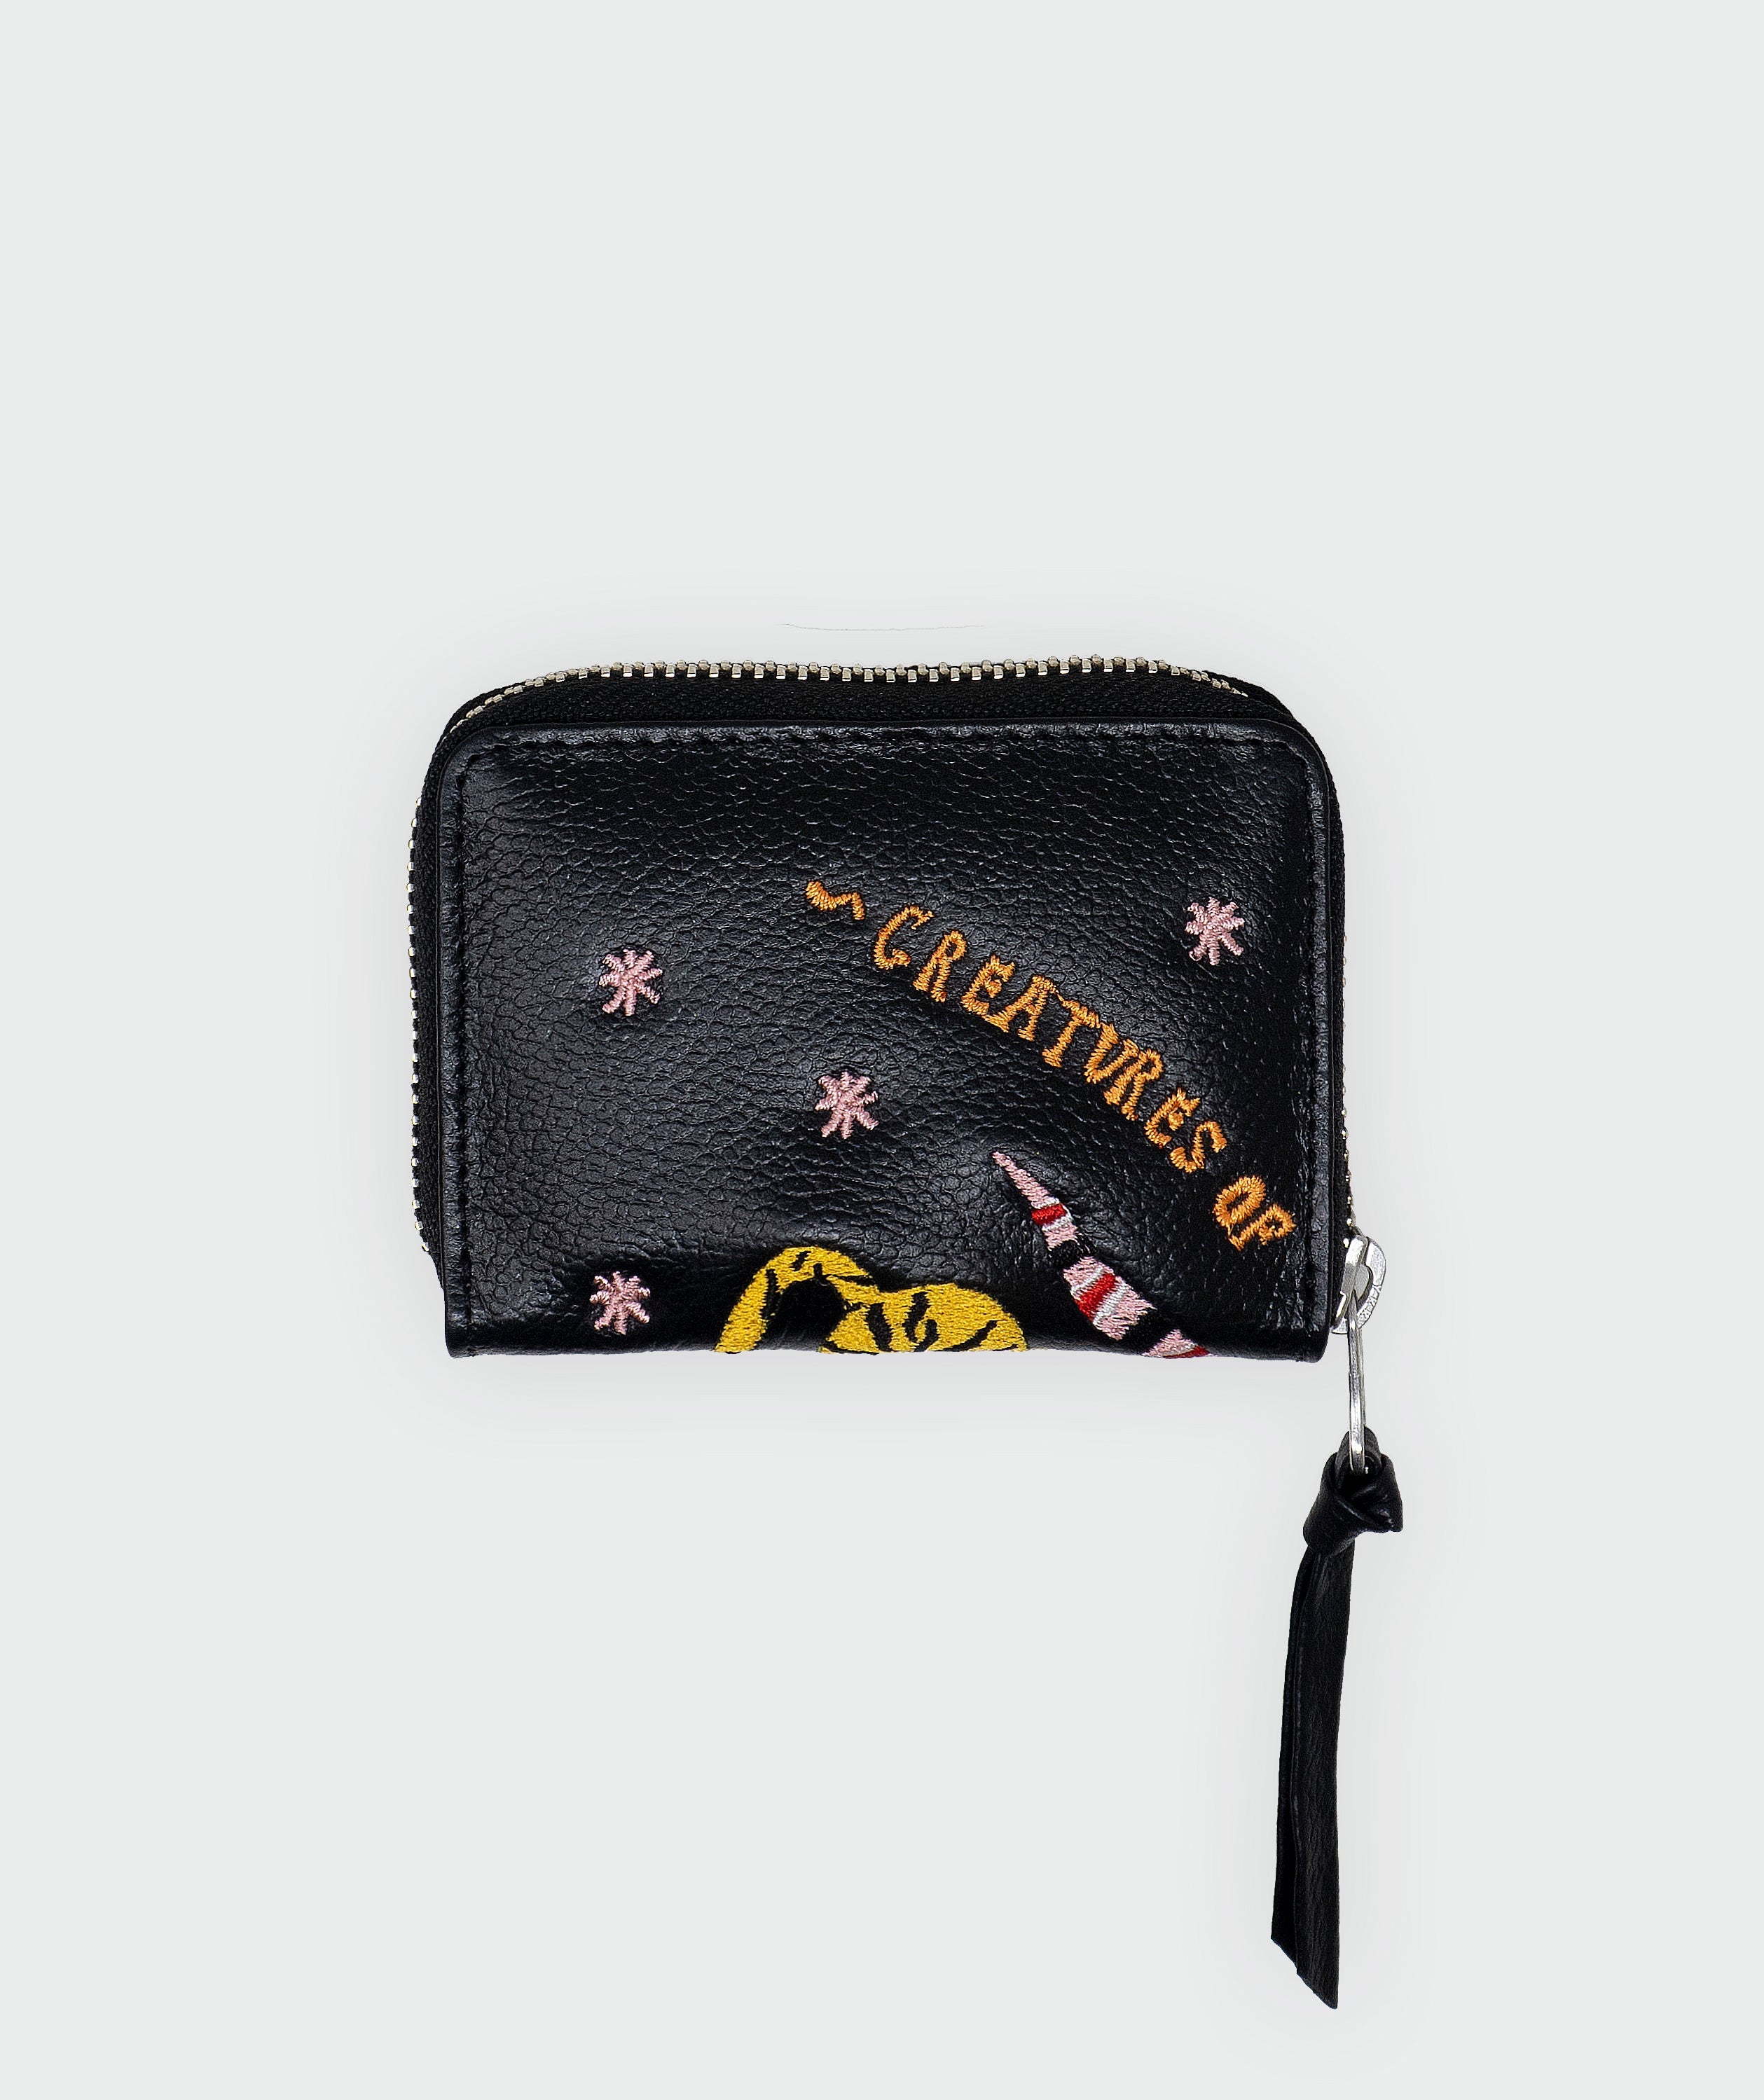 Frodo Wallet - Black Leather All Over Eyes Embroidery